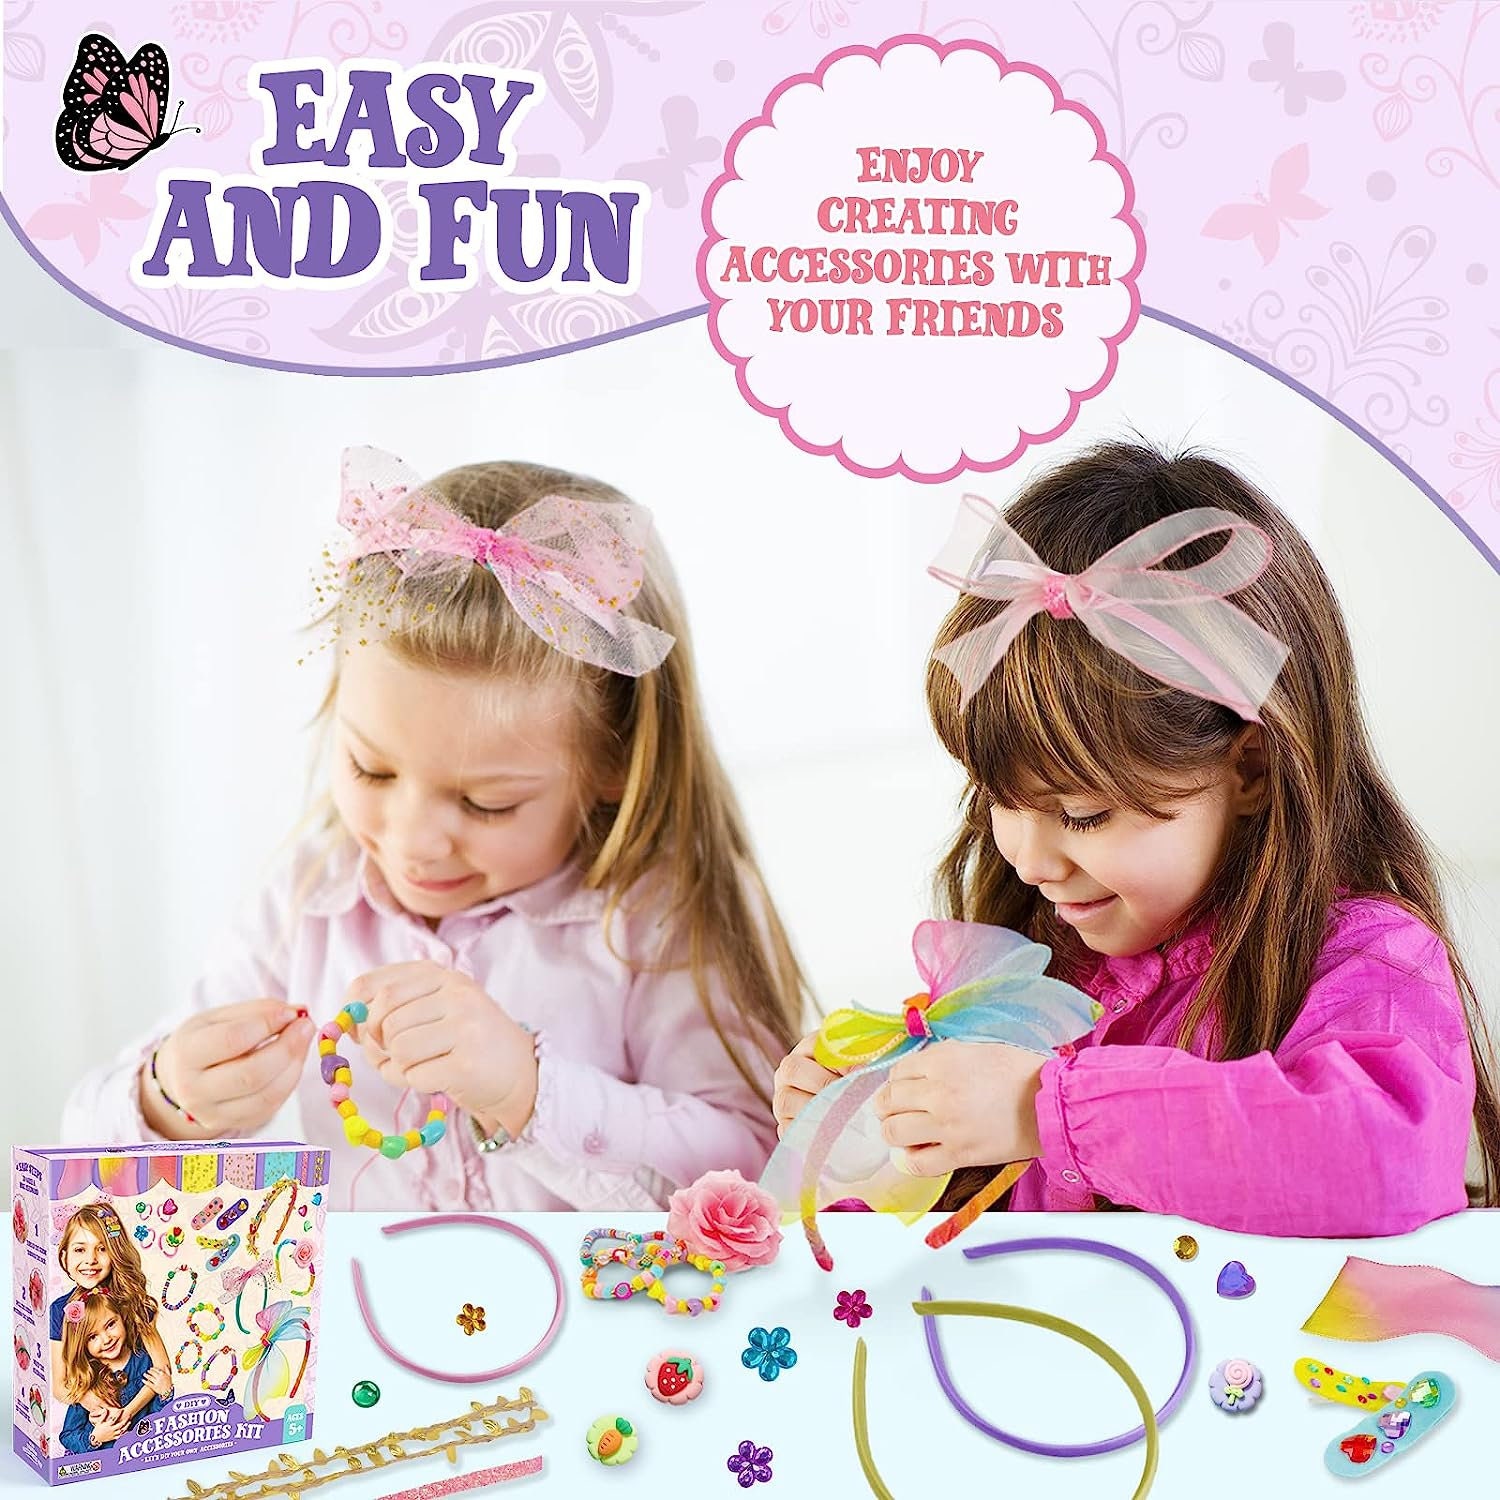 Best Gifts for 6-year-old Girls: Craft Kits for Kids 6-12 | Fashion Girls Hair Accessories Making Set | That allows Girls to Make Their Own Unique DIY